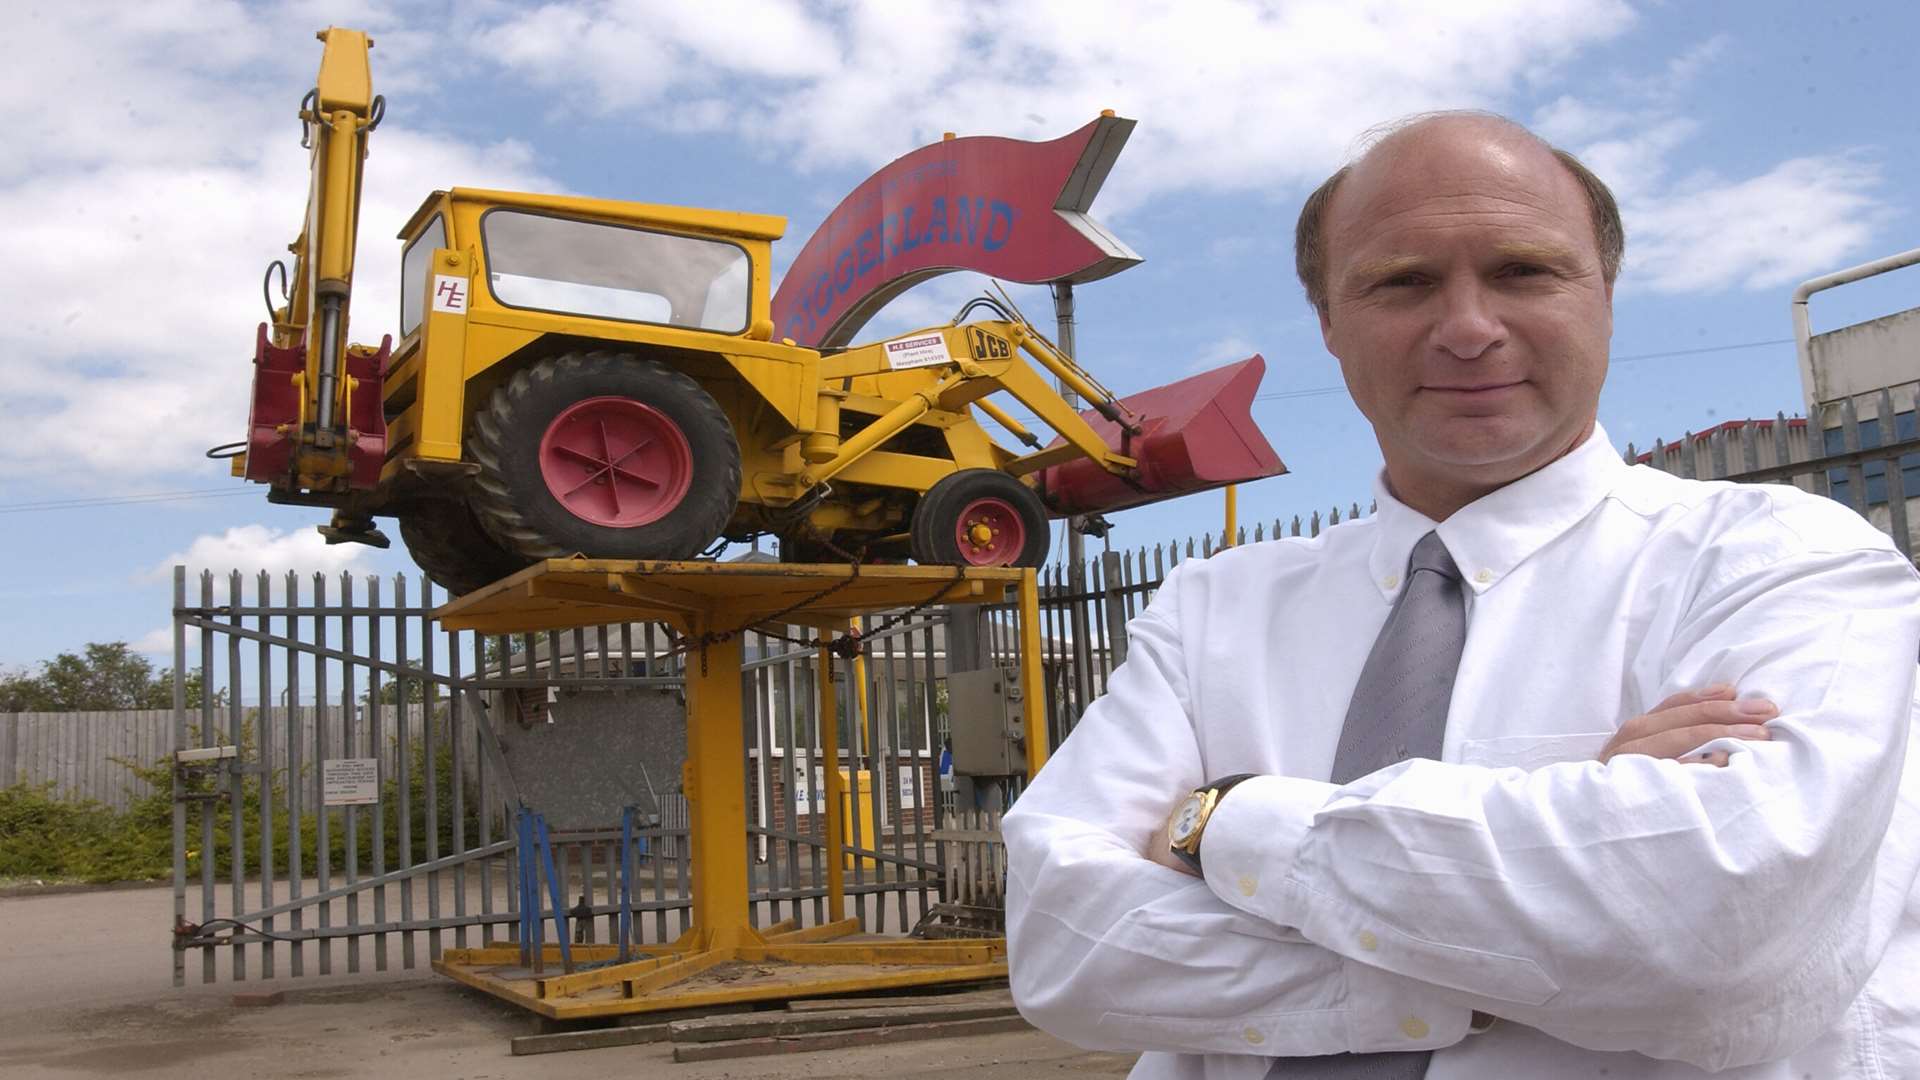 Hugh Edeleanu, chairman of H. E. Services Group of Companies and founder of Diggerland